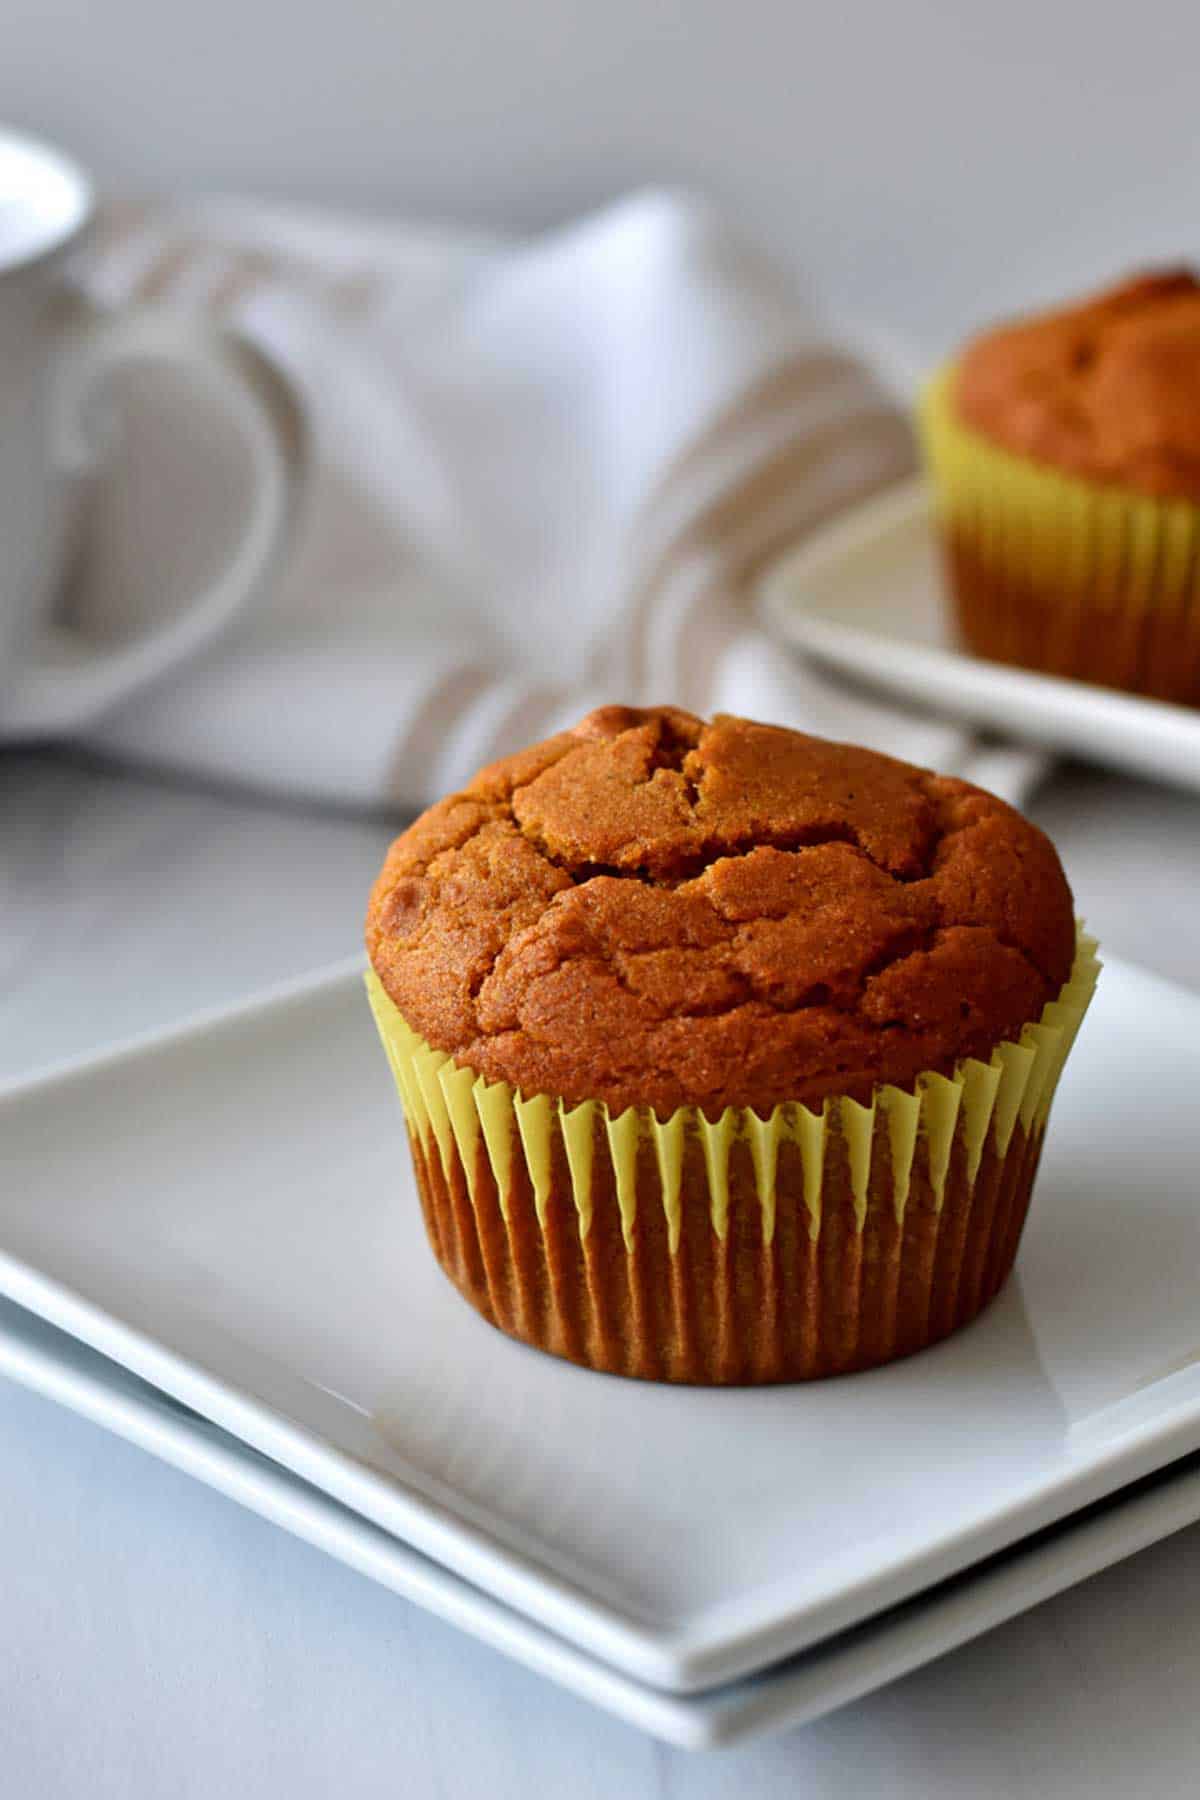 One gluten free pumpkin muffin on a stack of plates with a coffee cup, a brown and white striped towel, and another muffin in the background.